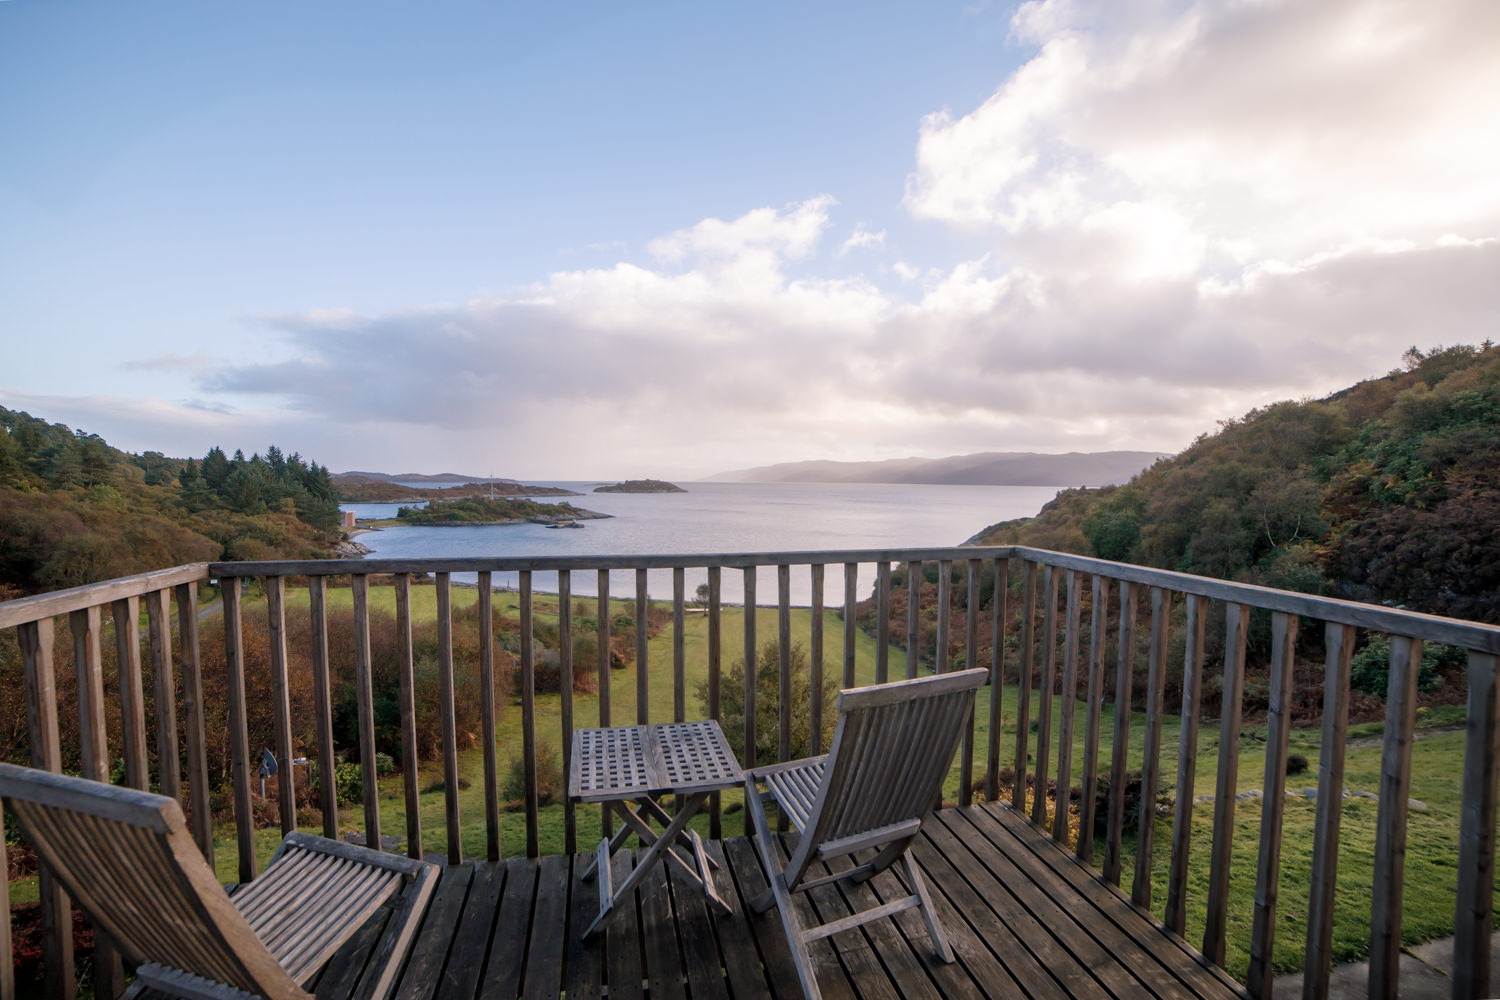 Crispie Lodge - stunning loch view from the balcony